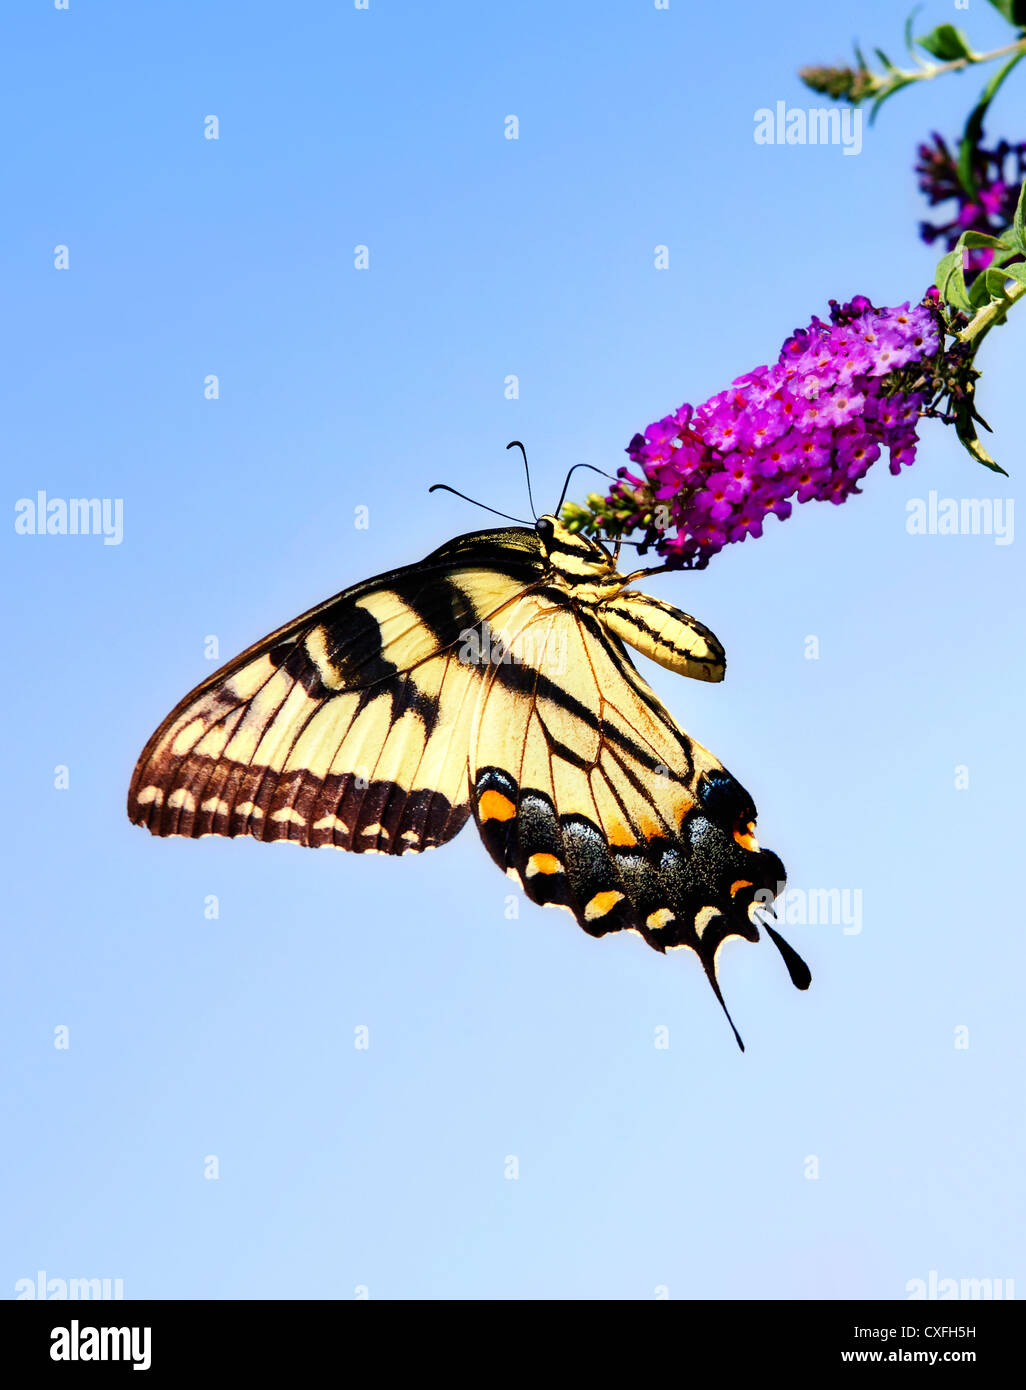 Eastern Tiger Swallowtail butterfly (Papilio glaucus) on butterfly bush flower Stock Photo